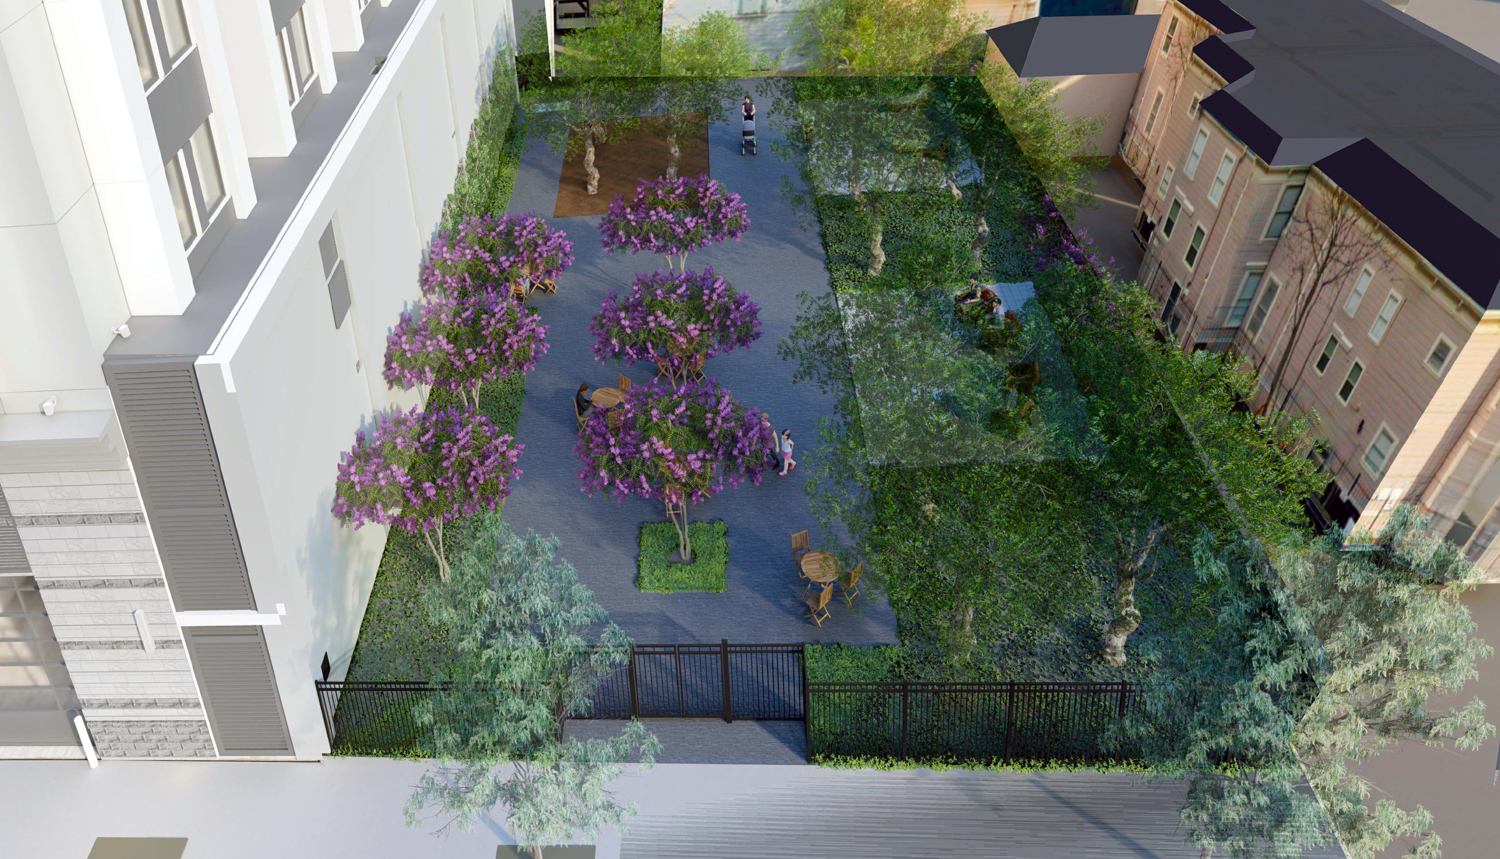 Aerial view of the proposed garden to replace the parking garage in the Marriott at 1431 Jefferson Street, design by Stanton Architecture